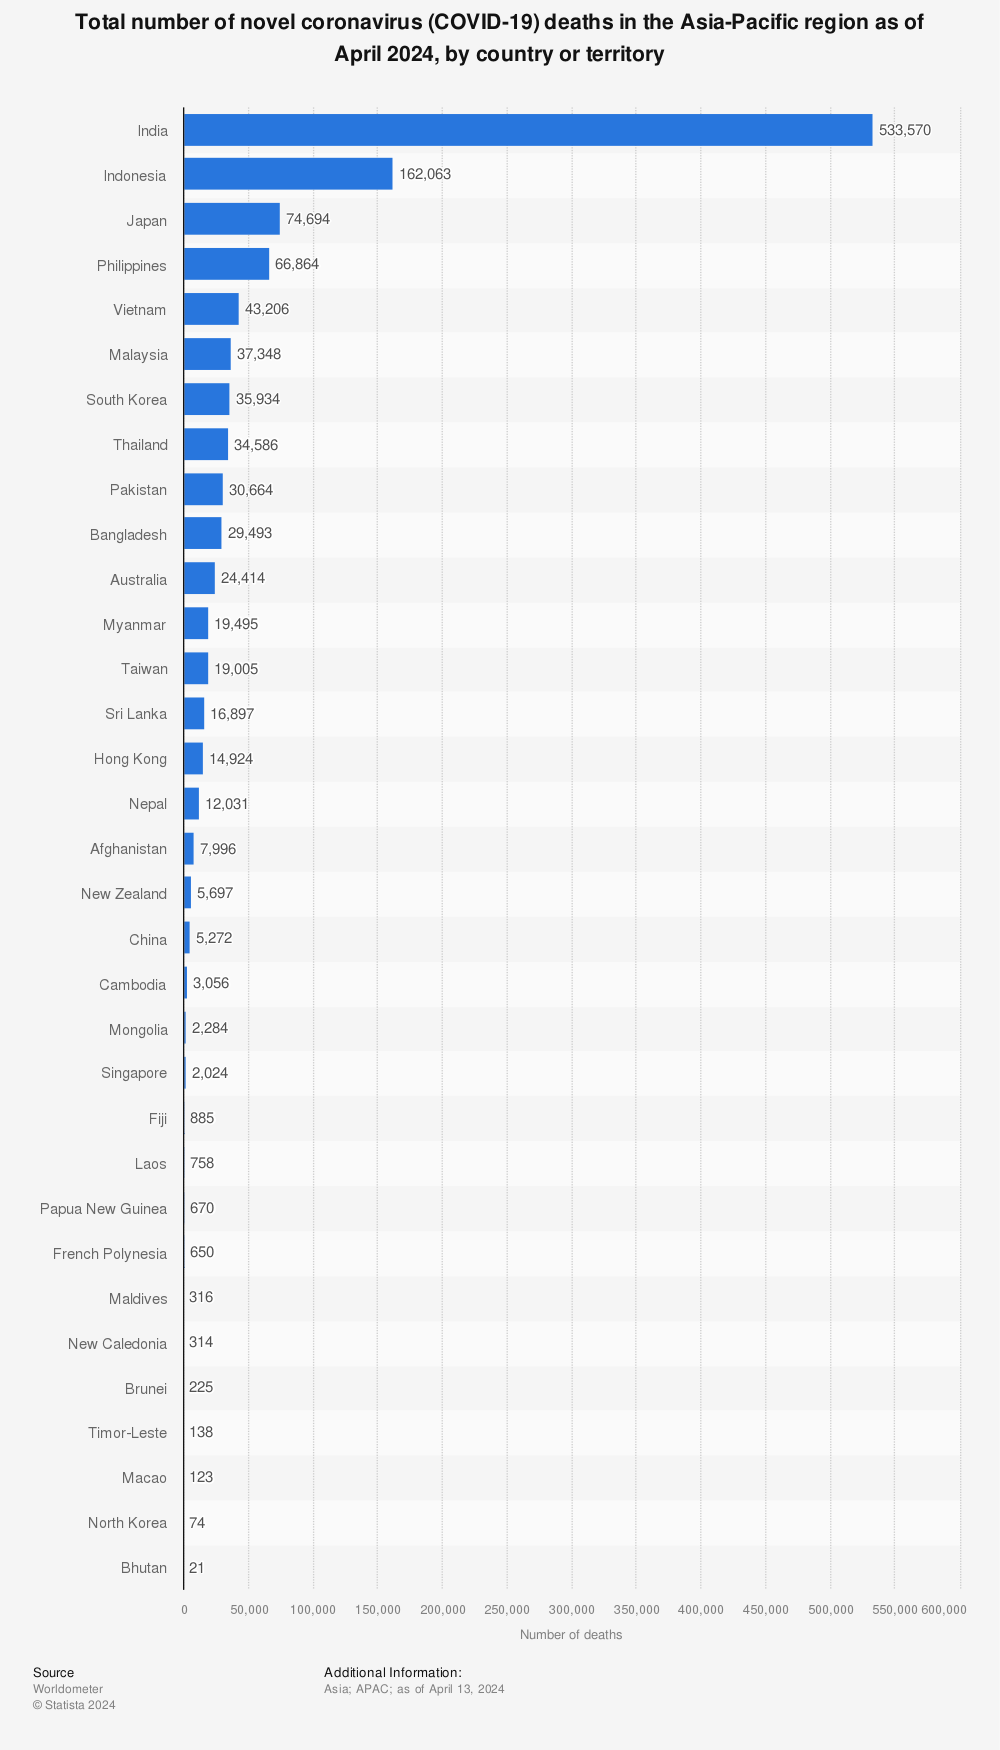 Statistic: Number of novel coronavirus (COVID-19) deaths in the Asia-Pacific region as of May 16, 2022, by country | Statista